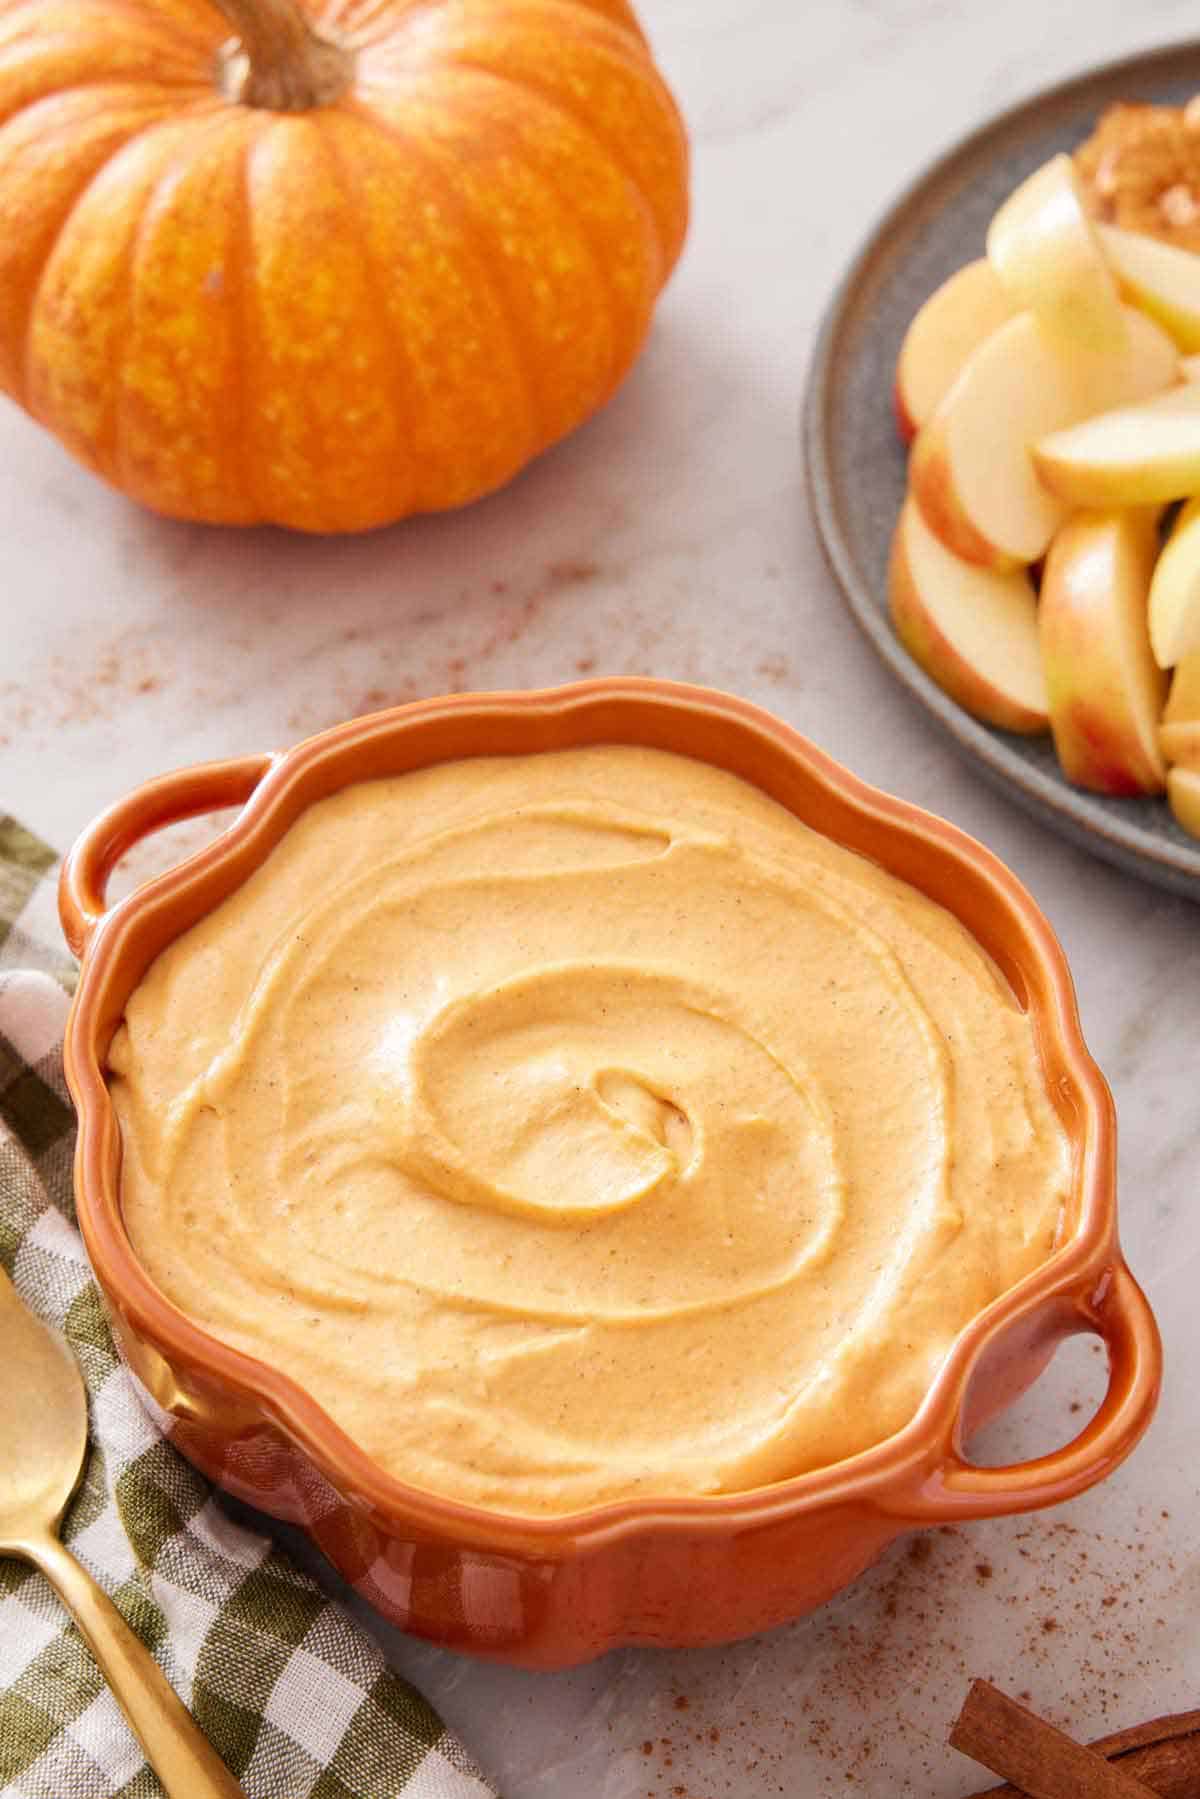 A pumpkin-shaped bowl containing pumpkin dip with some apple slices and a pumpkin on the side.